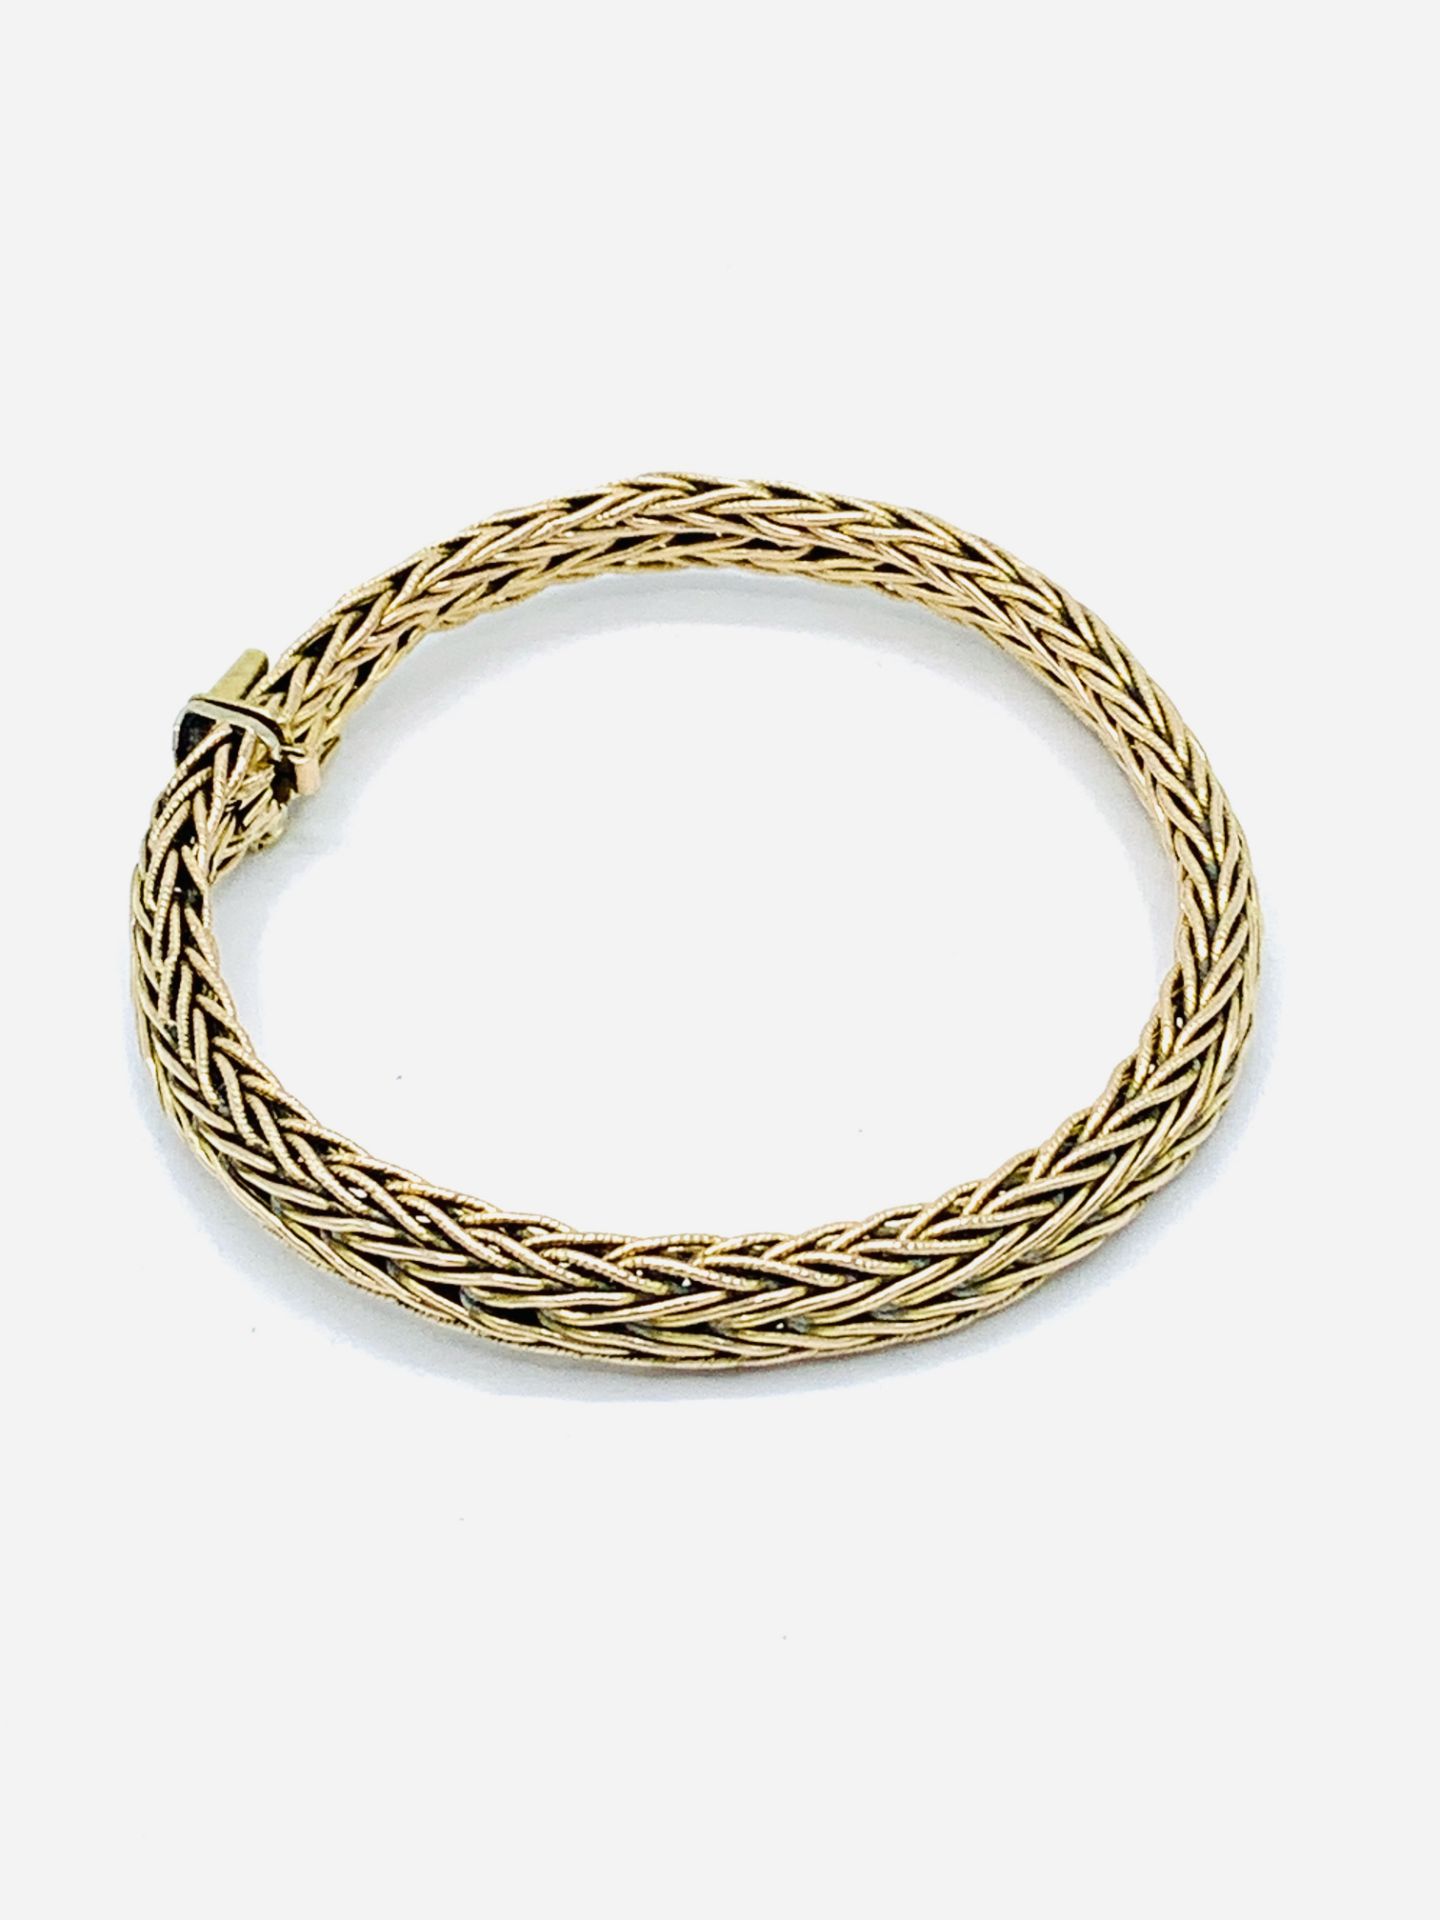 9ct gold woven wire bracelet. - Image 3 of 3